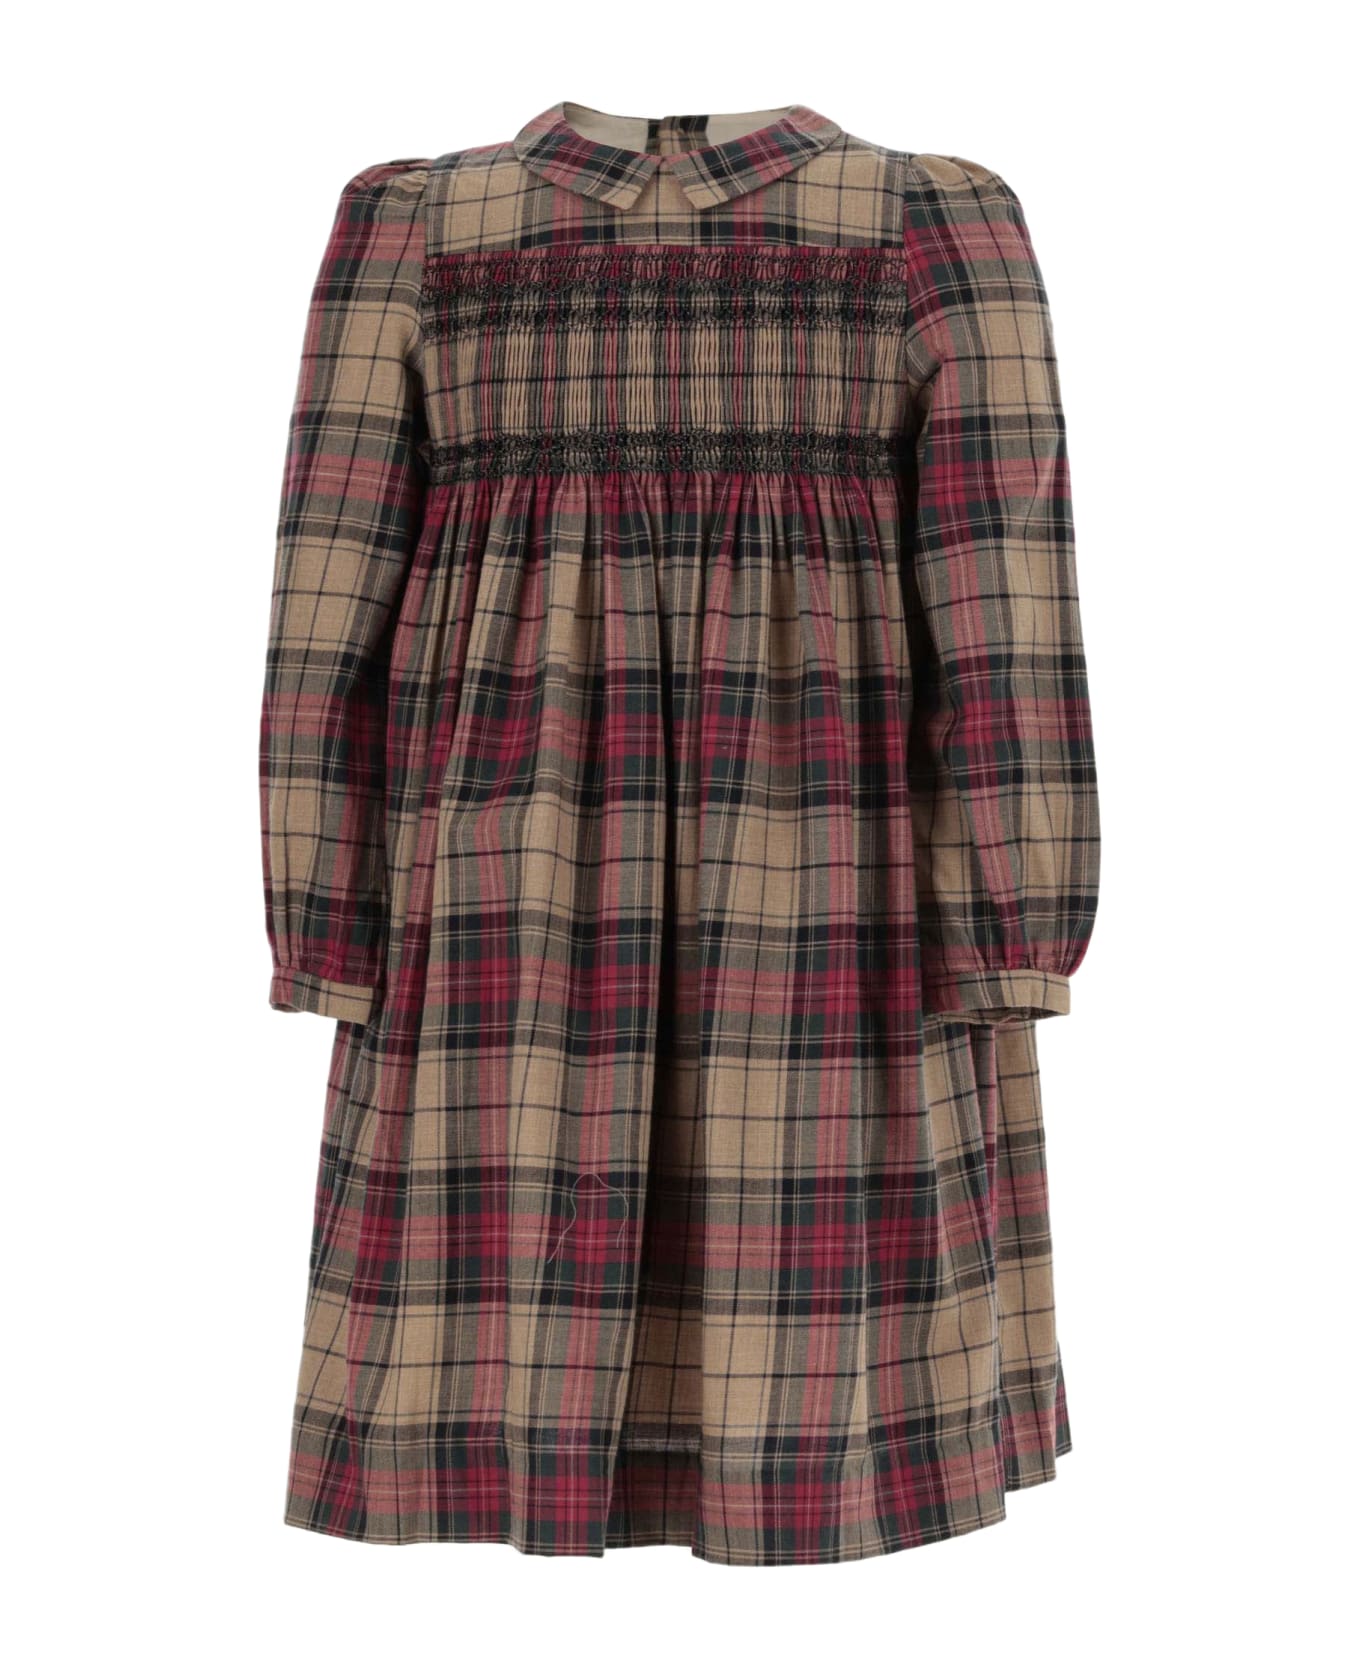 Bonpoint Cotton Dress With Check Pattern - Brown